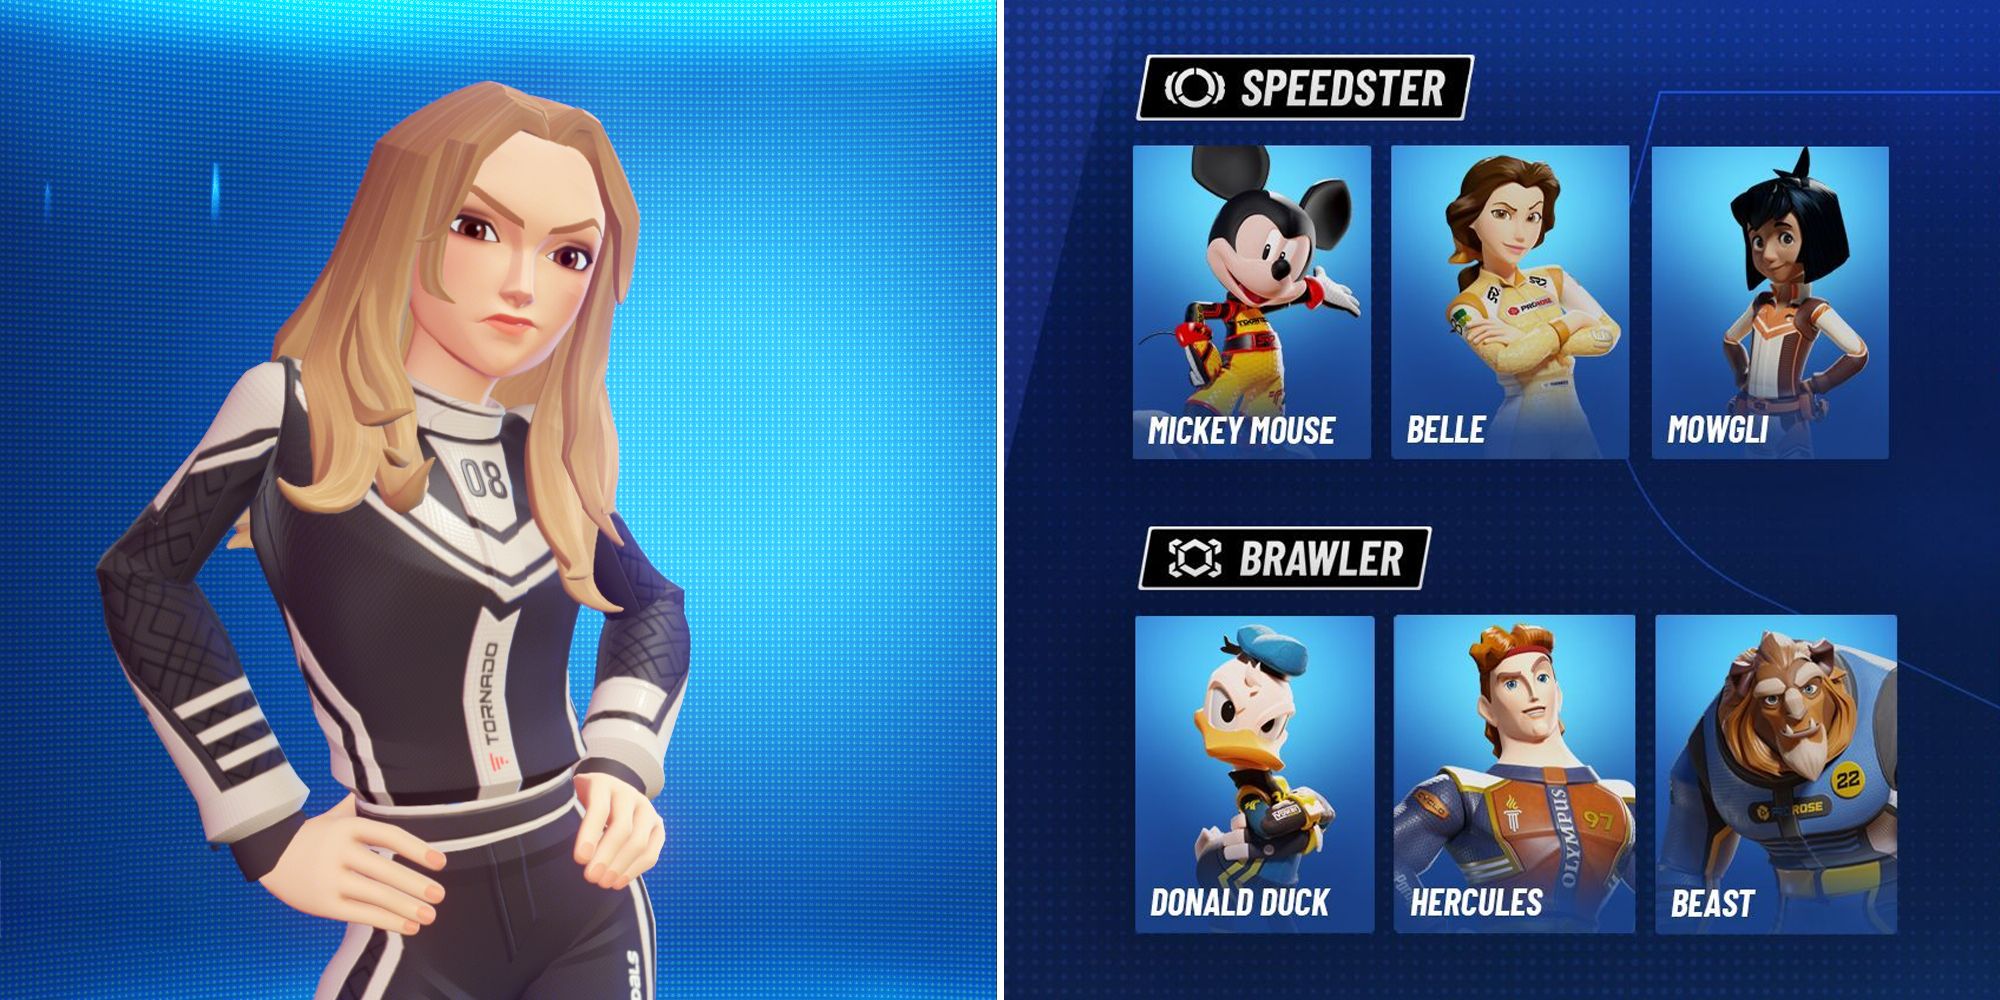 Image depicts Elizabeth Swann from Pirates of the Caribbean in Disney Speedstorm on the left. On the right is part of the character menu in the game, including Mickey Mouse, Belle, Mowgli, Donald Duck, Hercules, and Beast.